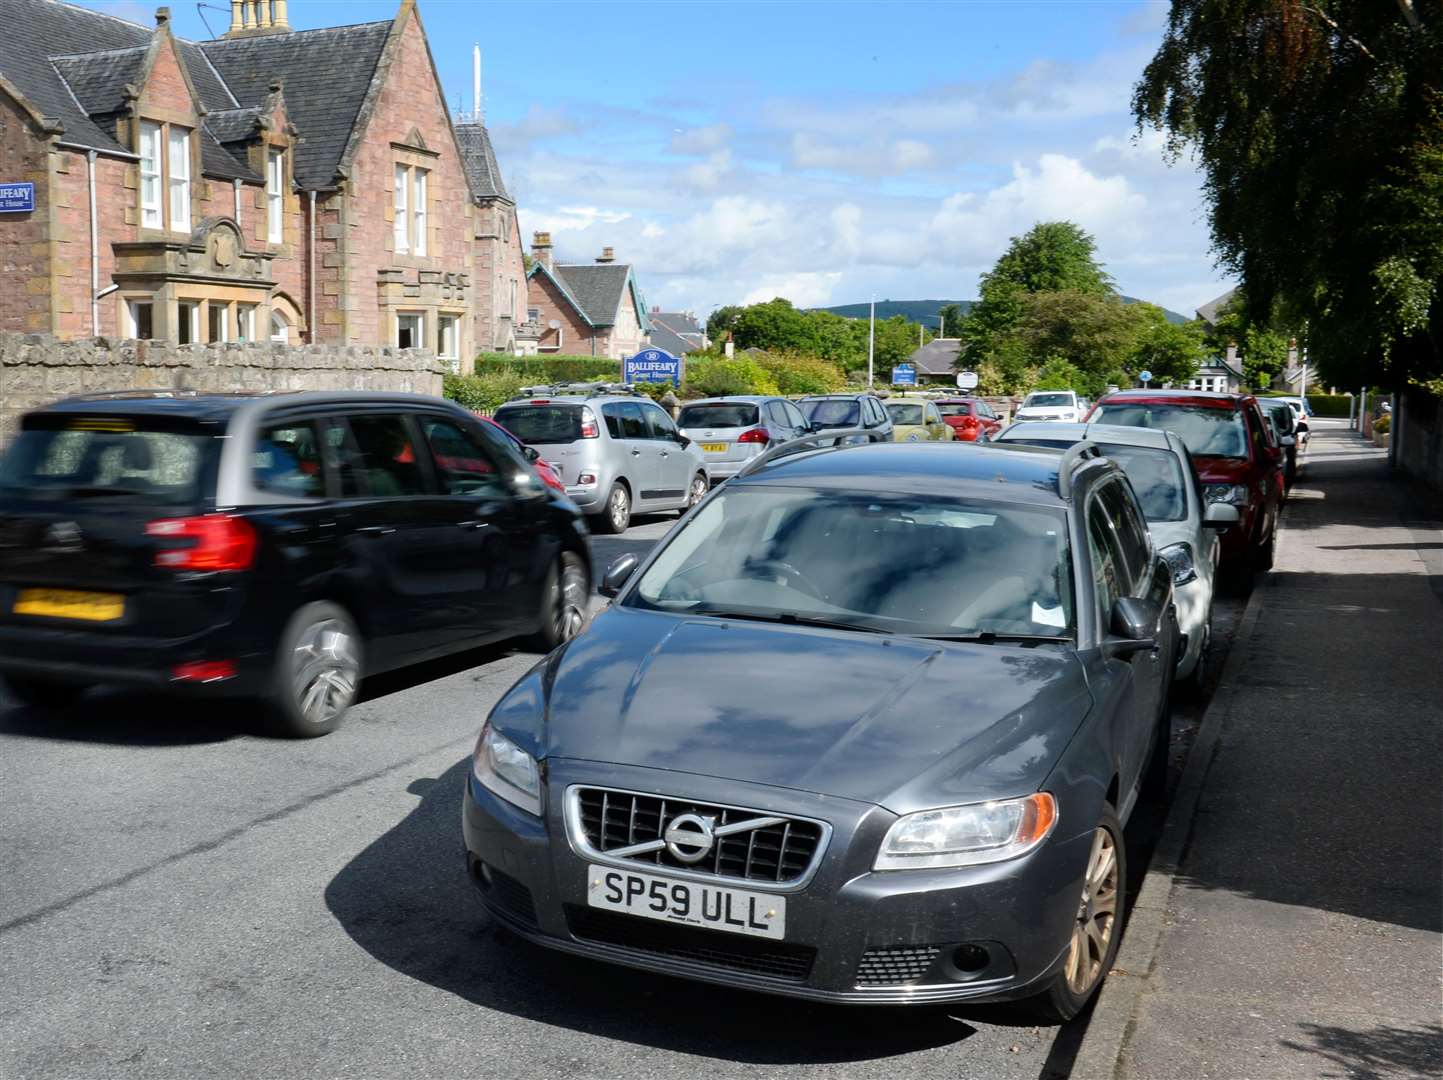 The plans could lead to traffic problems in Ballifeary.